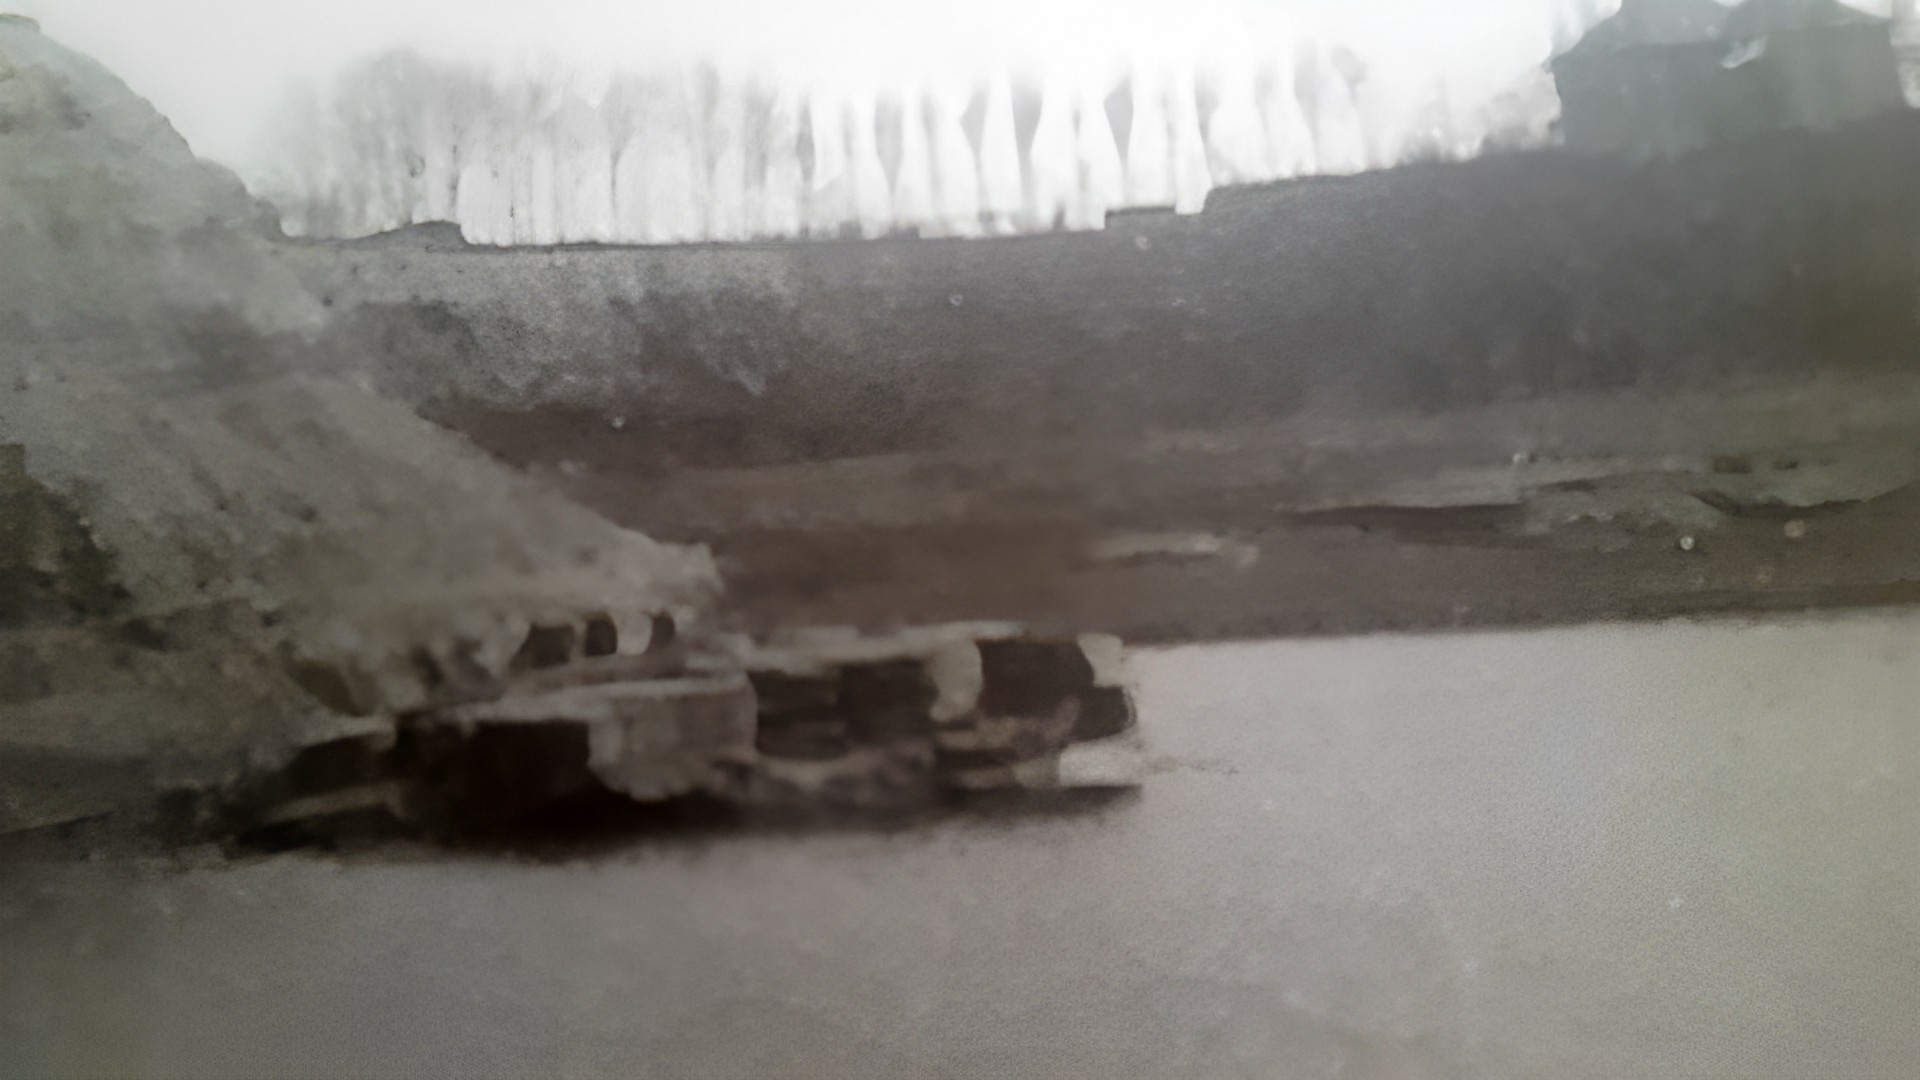 Stairfoot Brickworks flooded quarry